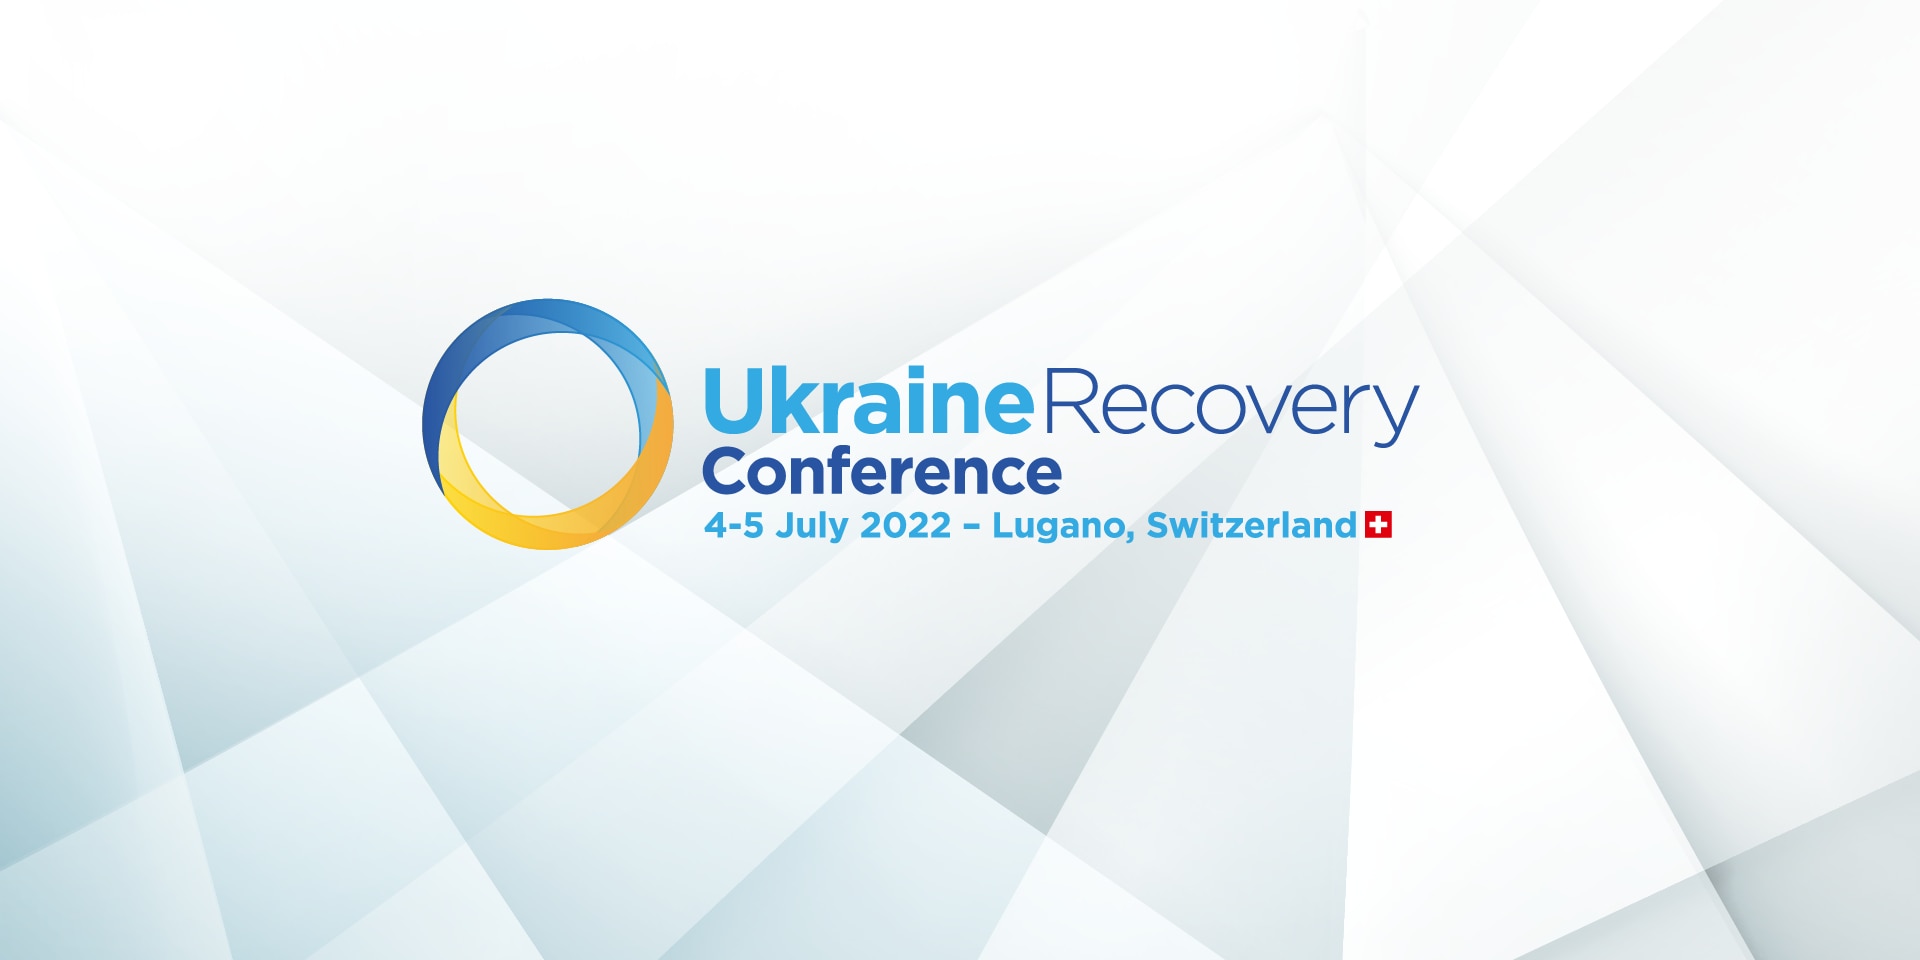 The logo of the Ukraine Recovery Conference 2022, composed of a yellow and blue circle with details of the conference written in blue alongside it.